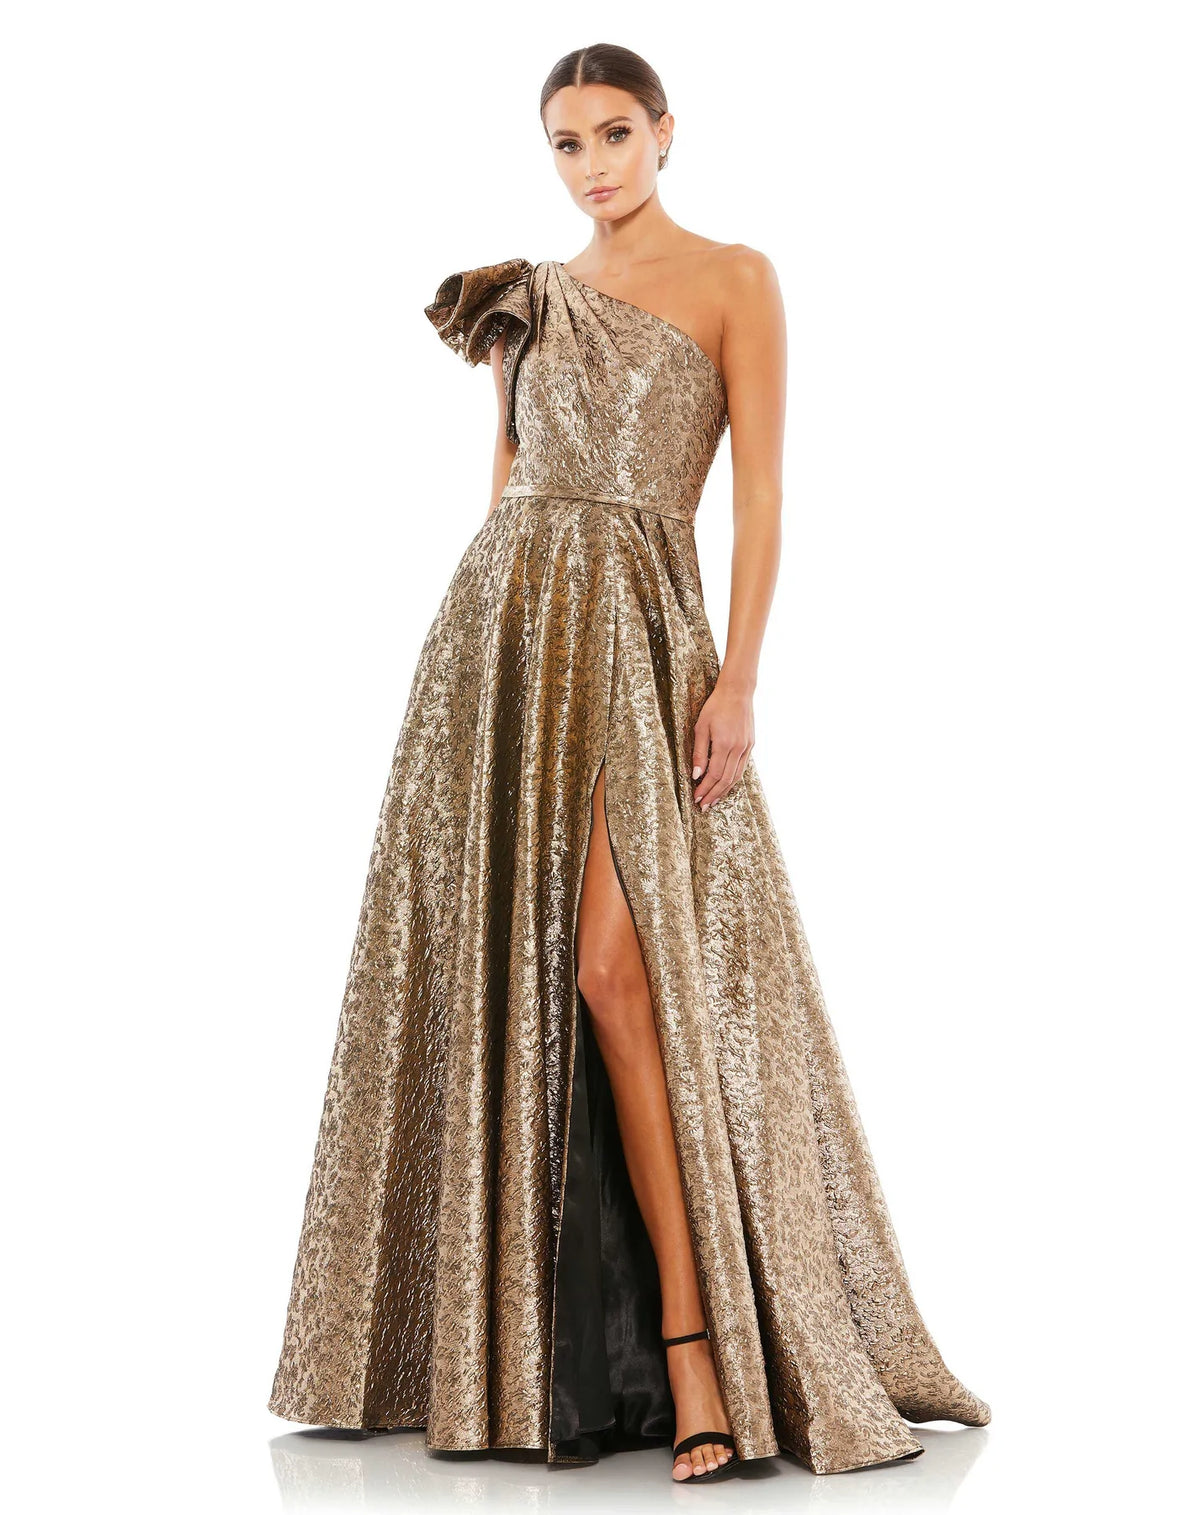 This stunningly elegant, one-shoulder metallic brocade antique gold, ball gown is a truly show-stopping evening dress accented with asymmetric chest detail, bow-detail on the shoulder, a cinched in waist and a beautiful full skirt with a thigh high split. This A line ball gown is perfect for proms, black-tie affairs, weddings and special events front view